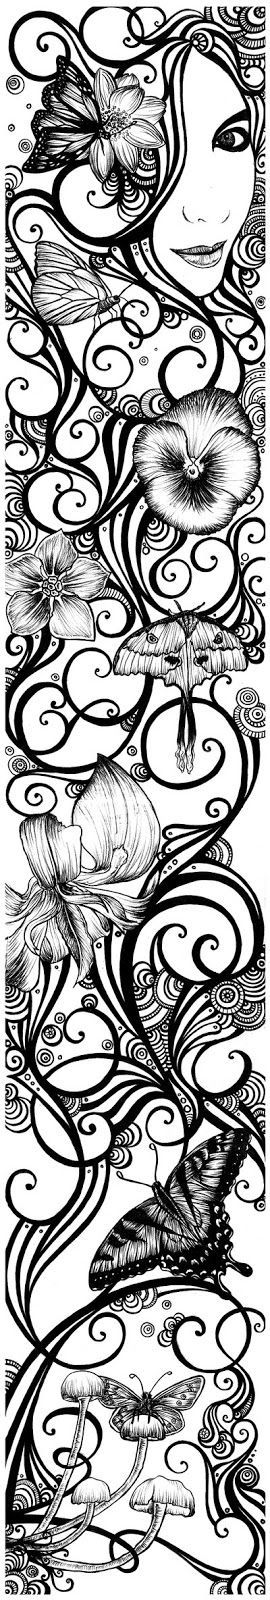 This is a gorgeous bookmark if you make the image smaller…. also very challenging to color when that size!